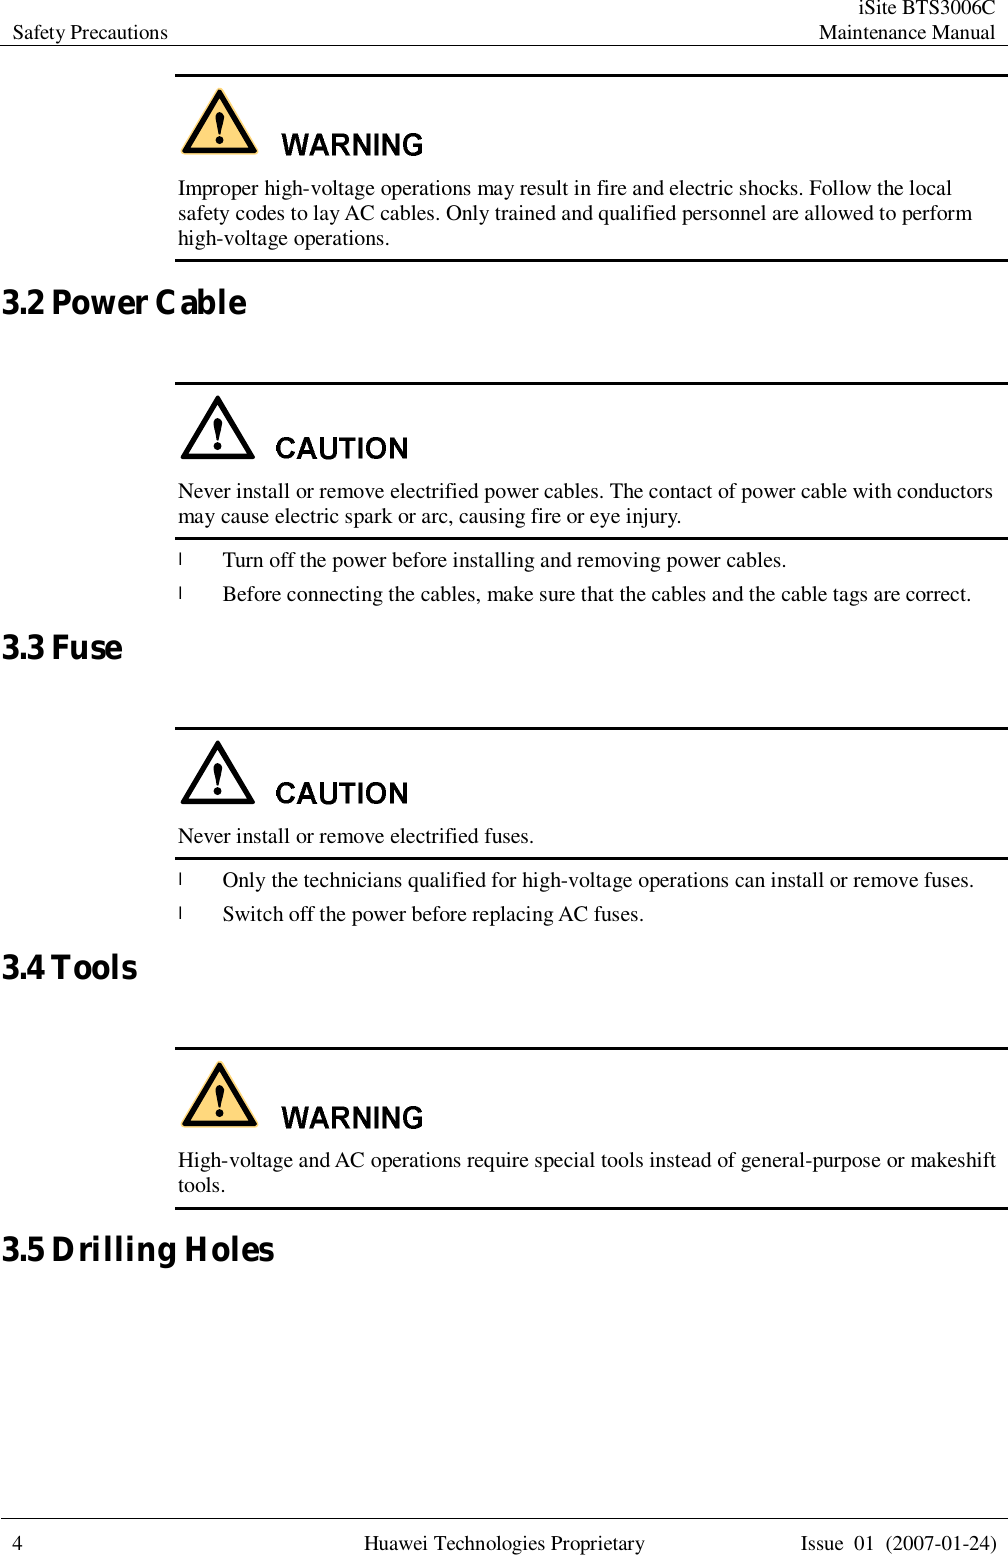 Safety Precautions  iSite BTS3006C Maintenance Manual  4 Huawei Technologies Proprietary Issue 01 (2007-01-24)   Improper high-voltage operations may result in fire and electric shocks. Follow the local safety codes to lay AC cables. Only trained and qualified personnel are allowed to perform high-voltage operations. 3.2 Power Cable   Never install or remove electrified power cables. The contact of power cable with conductors may cause electric spark or arc, causing fire or eye injury. l Turn off the power before installing and removing power cables. l Before connecting the cables, make sure that the cables and the cable tags are correct. 3.3 Fuse   Never install or remove electrified fuses. l Only the technicians qualified for high-voltage operations can install or remove fuses. l Switch off the power before replacing AC fuses. 3.4 Tools   High-voltage and AC operations require special tools instead of general-purpose or makeshift tools. 3.5 Drilling Holes  